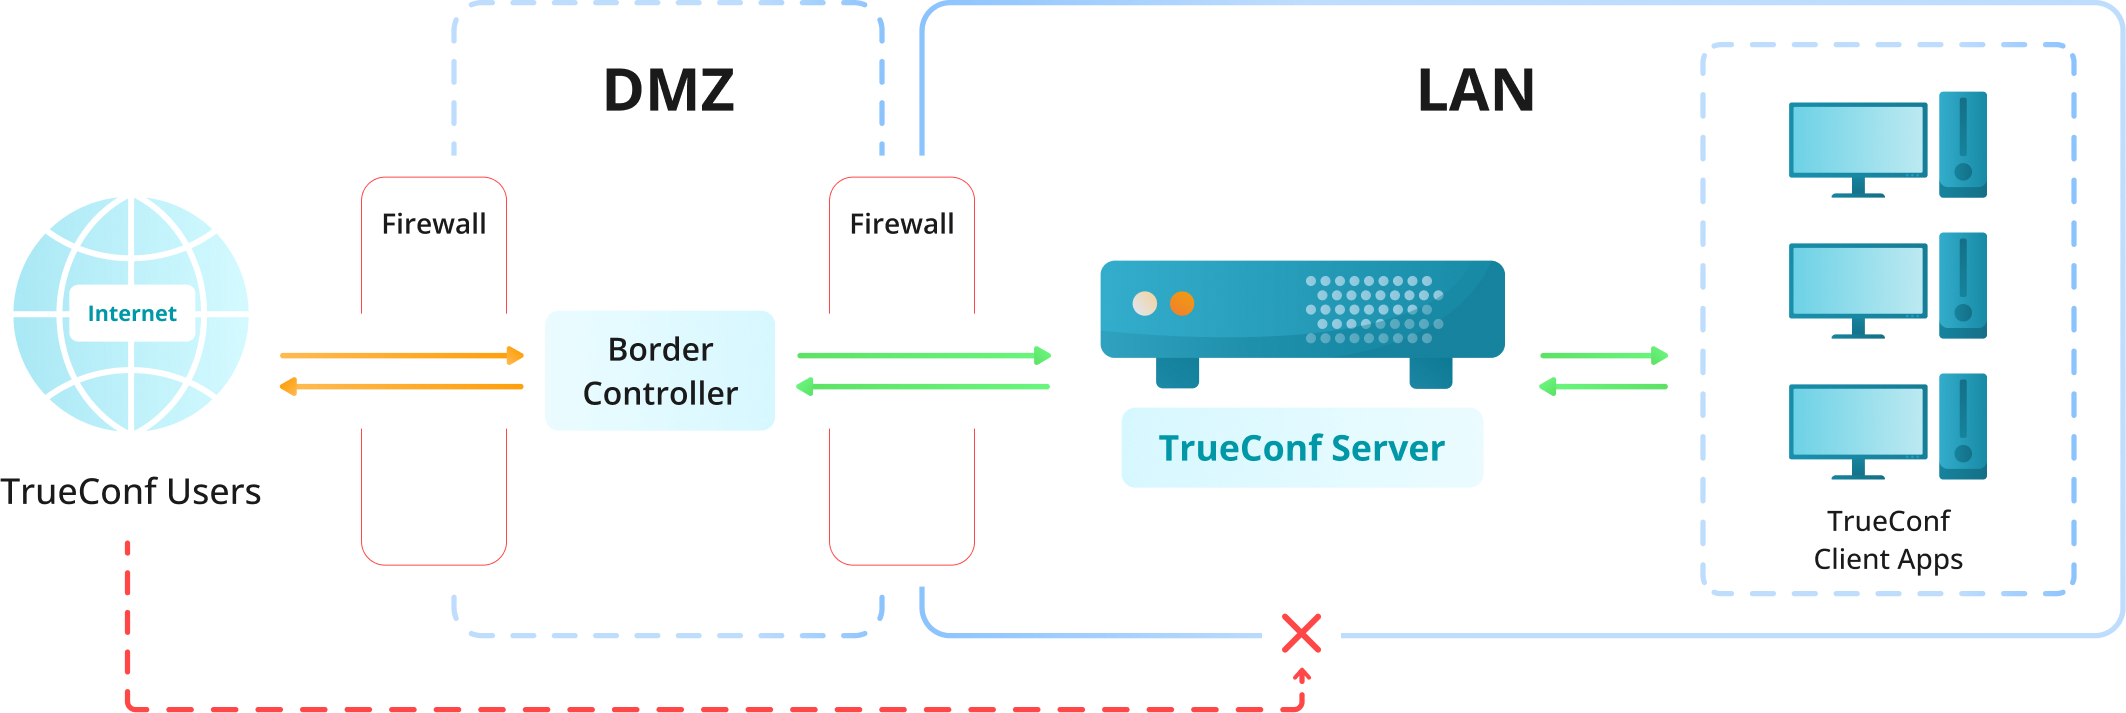 TrueConf introduces a new solution to protect on-premises video collaboration systems from external threats 2